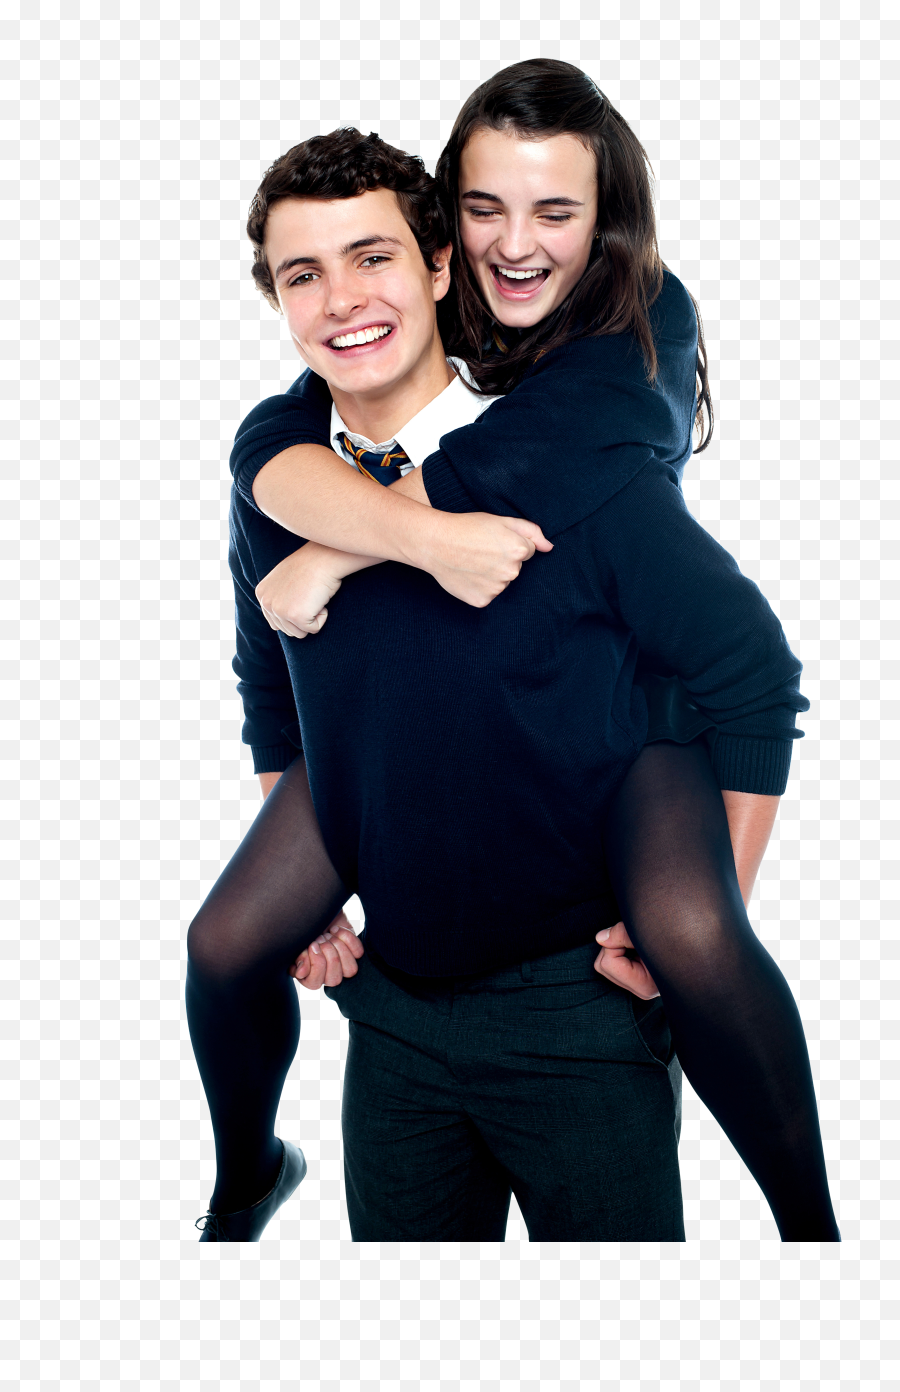 Download Romantic Couple Free Commercial Use Png Image - Png,Free Pngs For Commercial Use